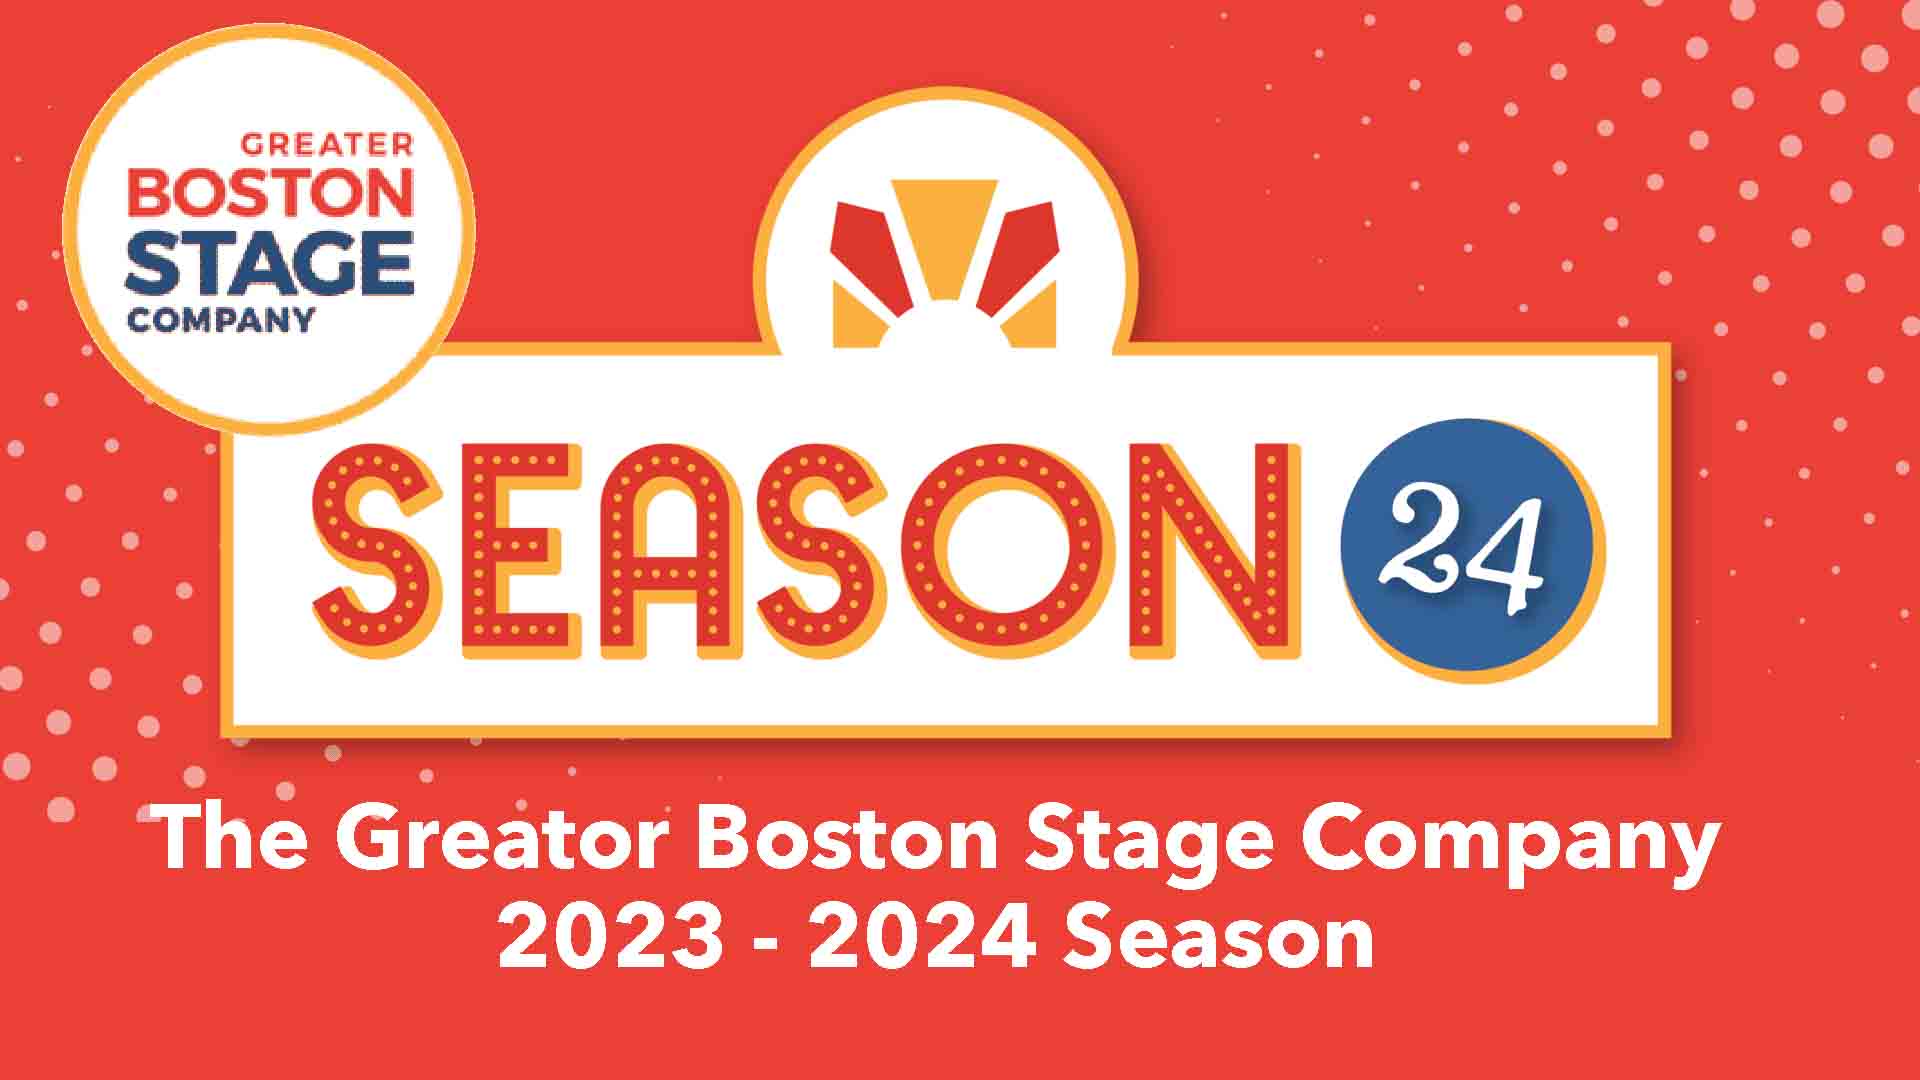 Announcing Greater Boston Stage Company's 2023 - 2024 Season